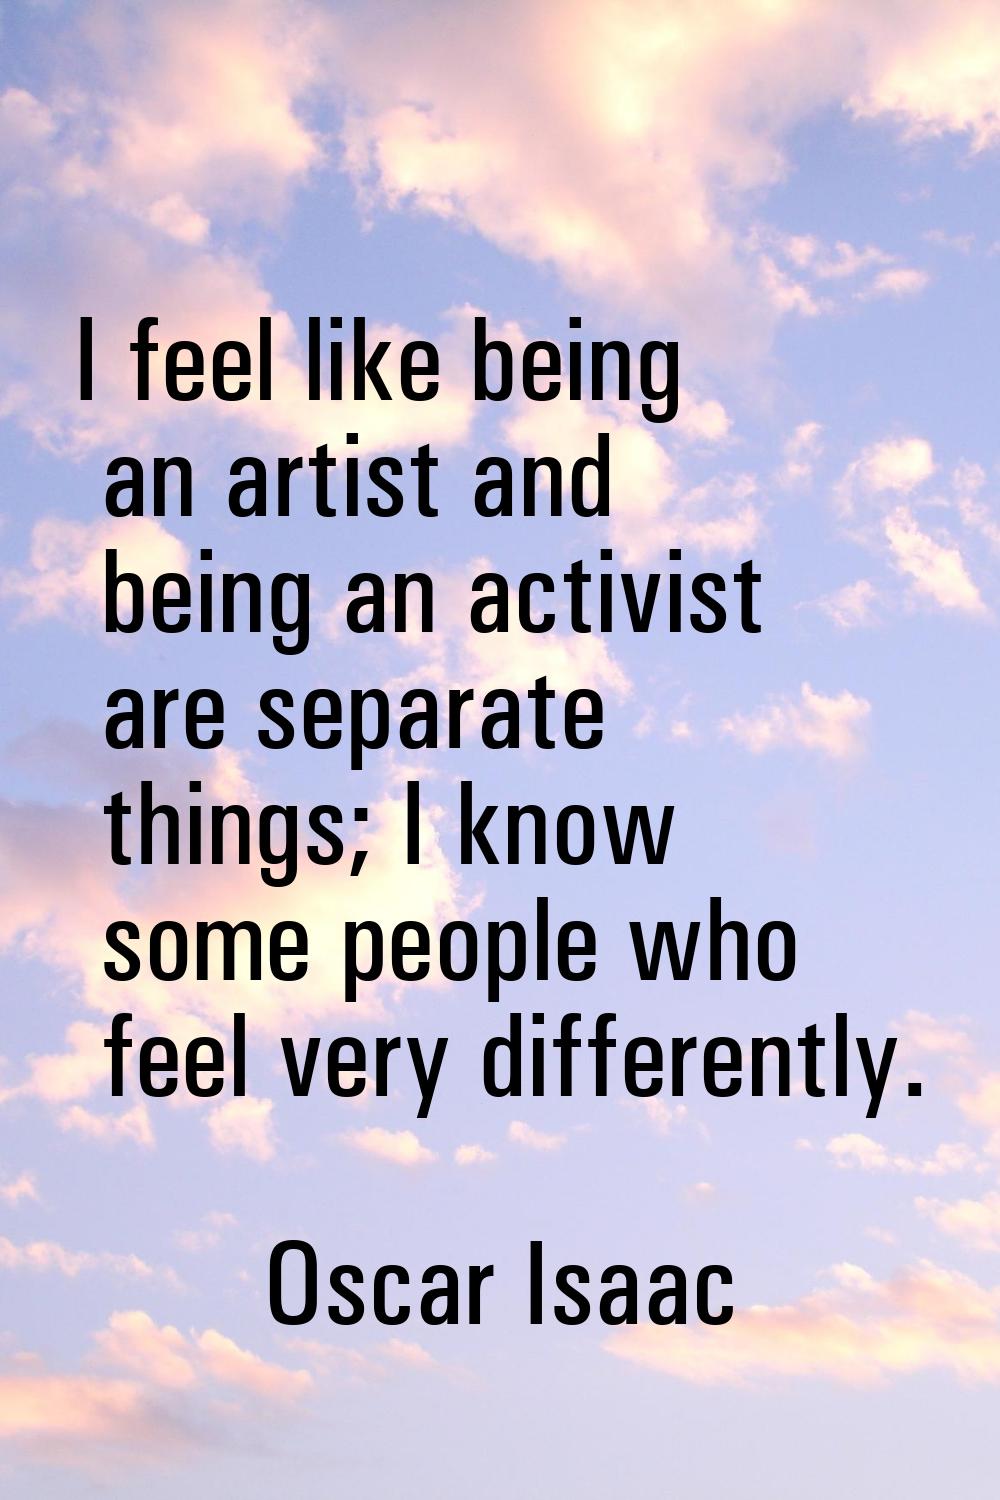 I feel like being an artist and being an activist are separate things; I know some people who feel 